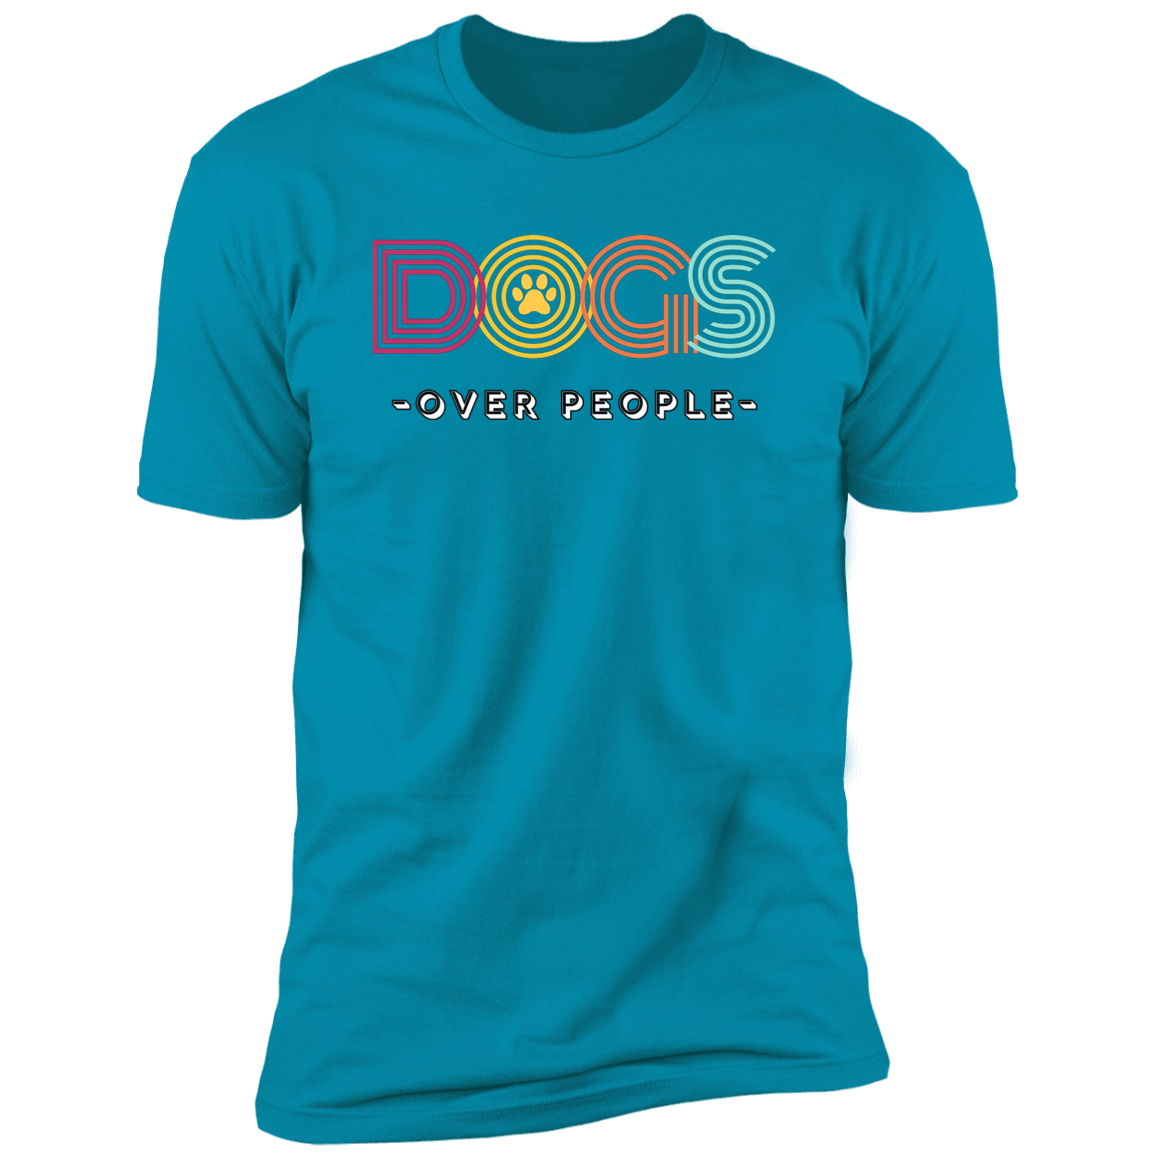 Dogs Over People t-shirt, funny dog shirt for humans, in turquoise